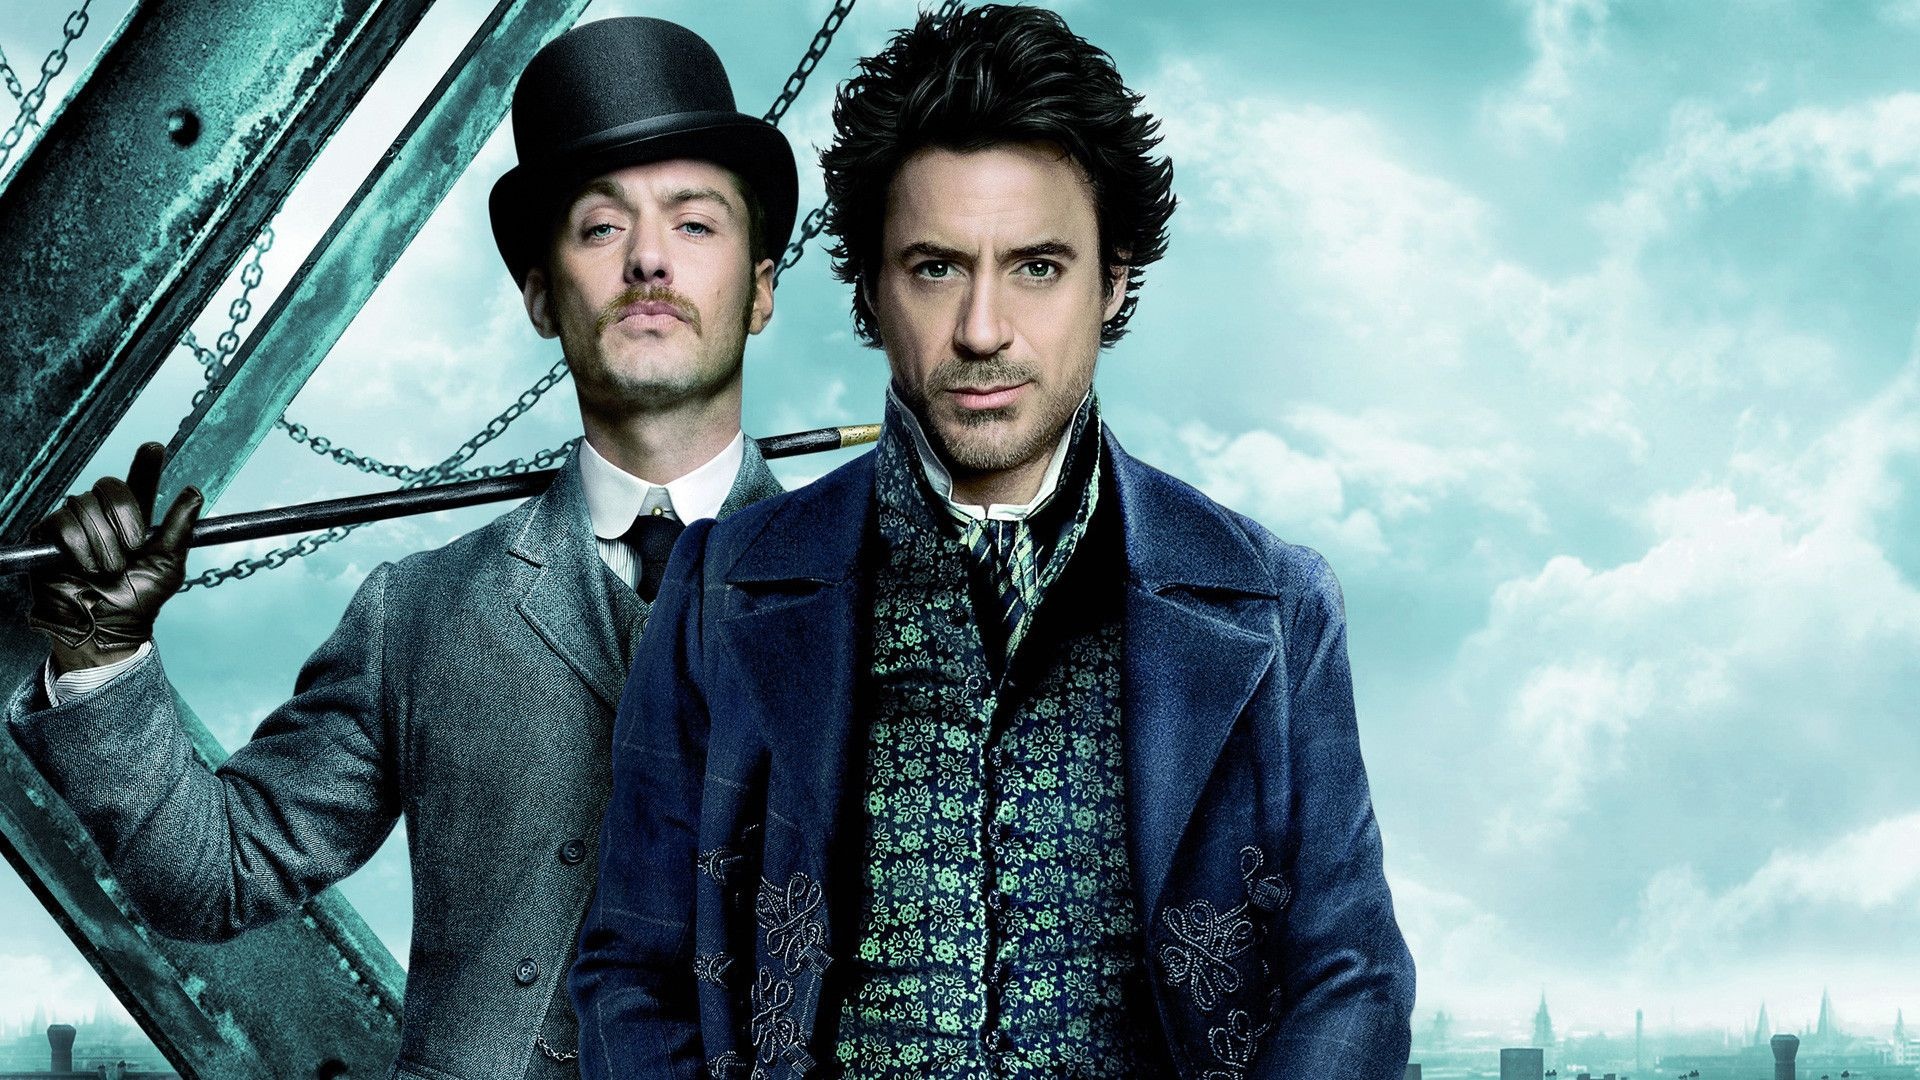 Sherlock Holmes 2 wallpapers, Top free backgrounds, Detective adventure, Action-packed, 1920x1080 Full HD Desktop